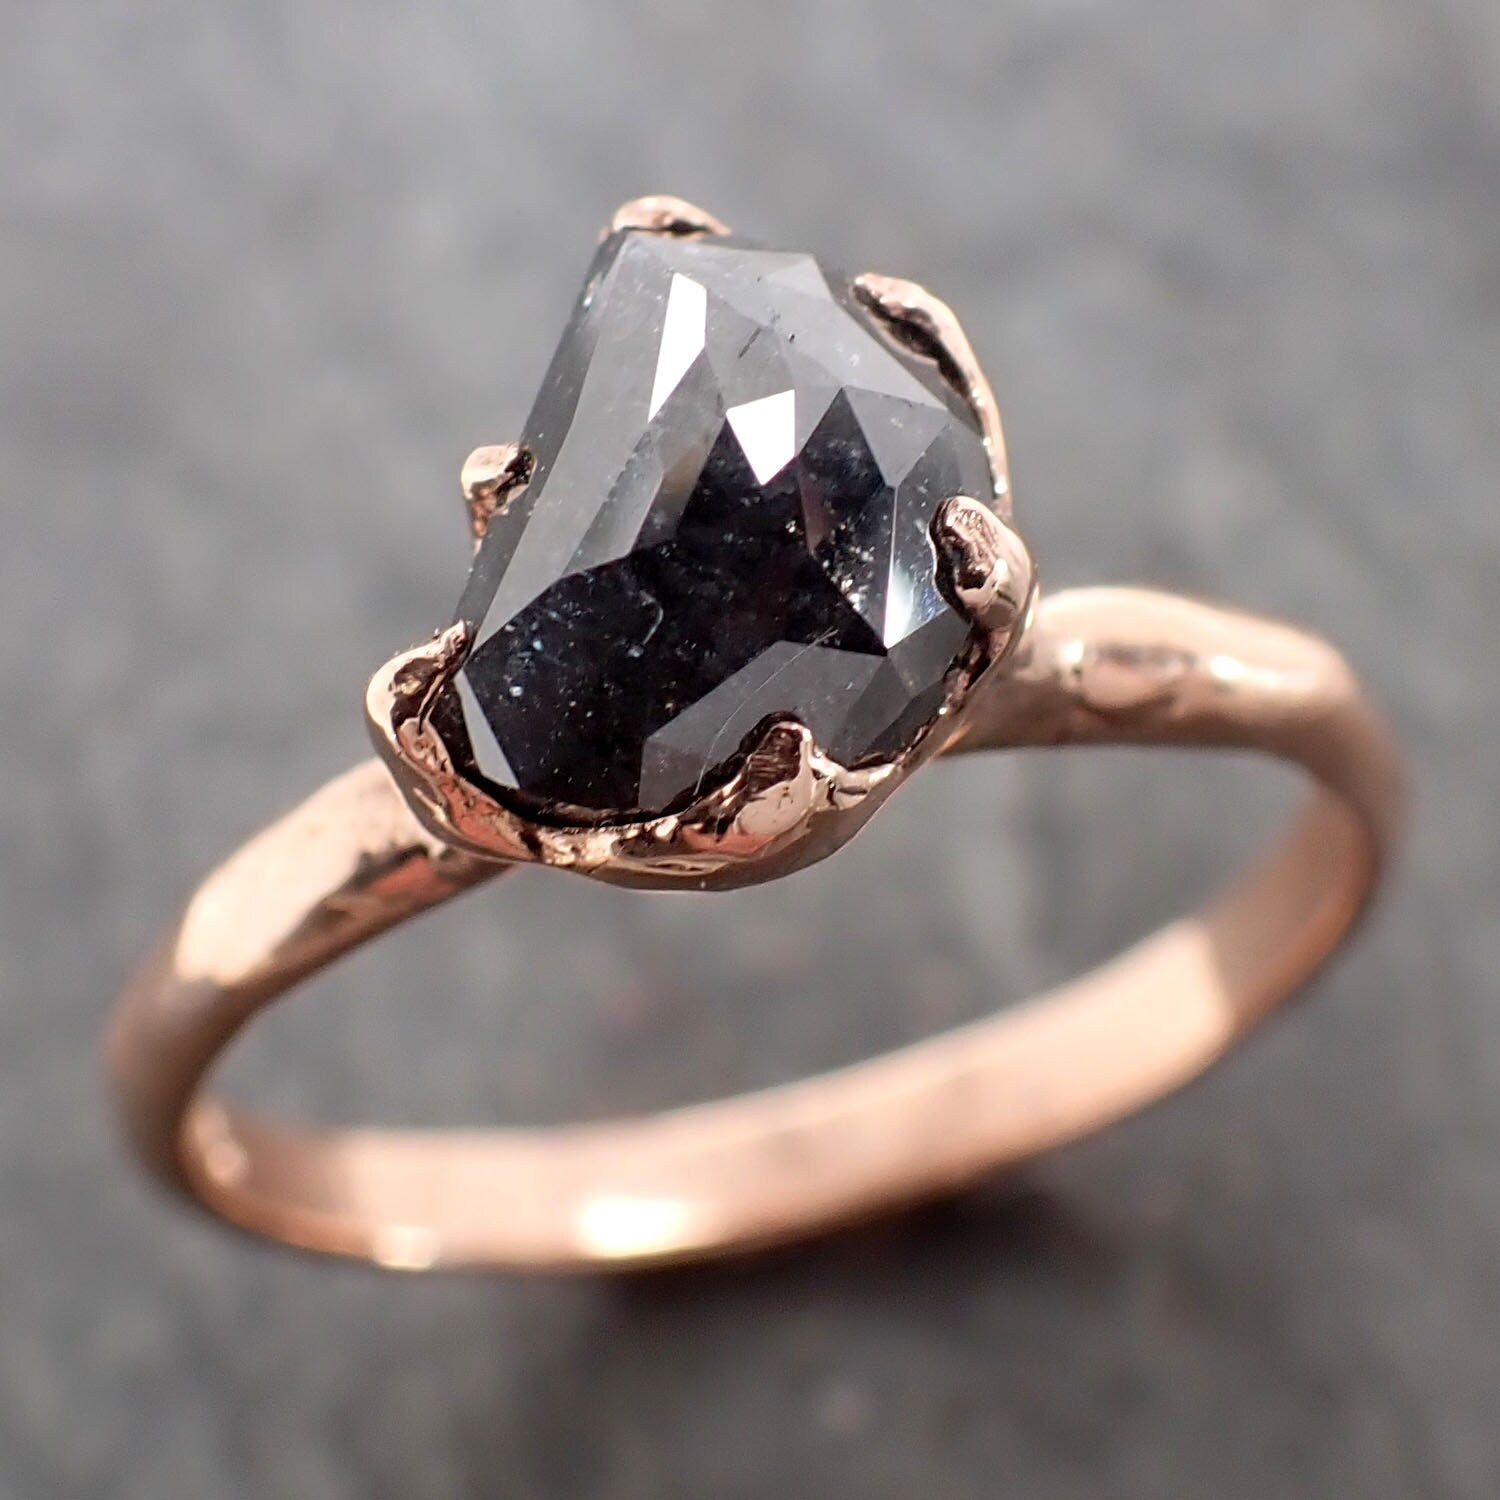 Faceted Fancy cut Salt and Pepper Diamond Solitaire Engagement 14k Rose Gold Wedding Ring byAngeline 2950